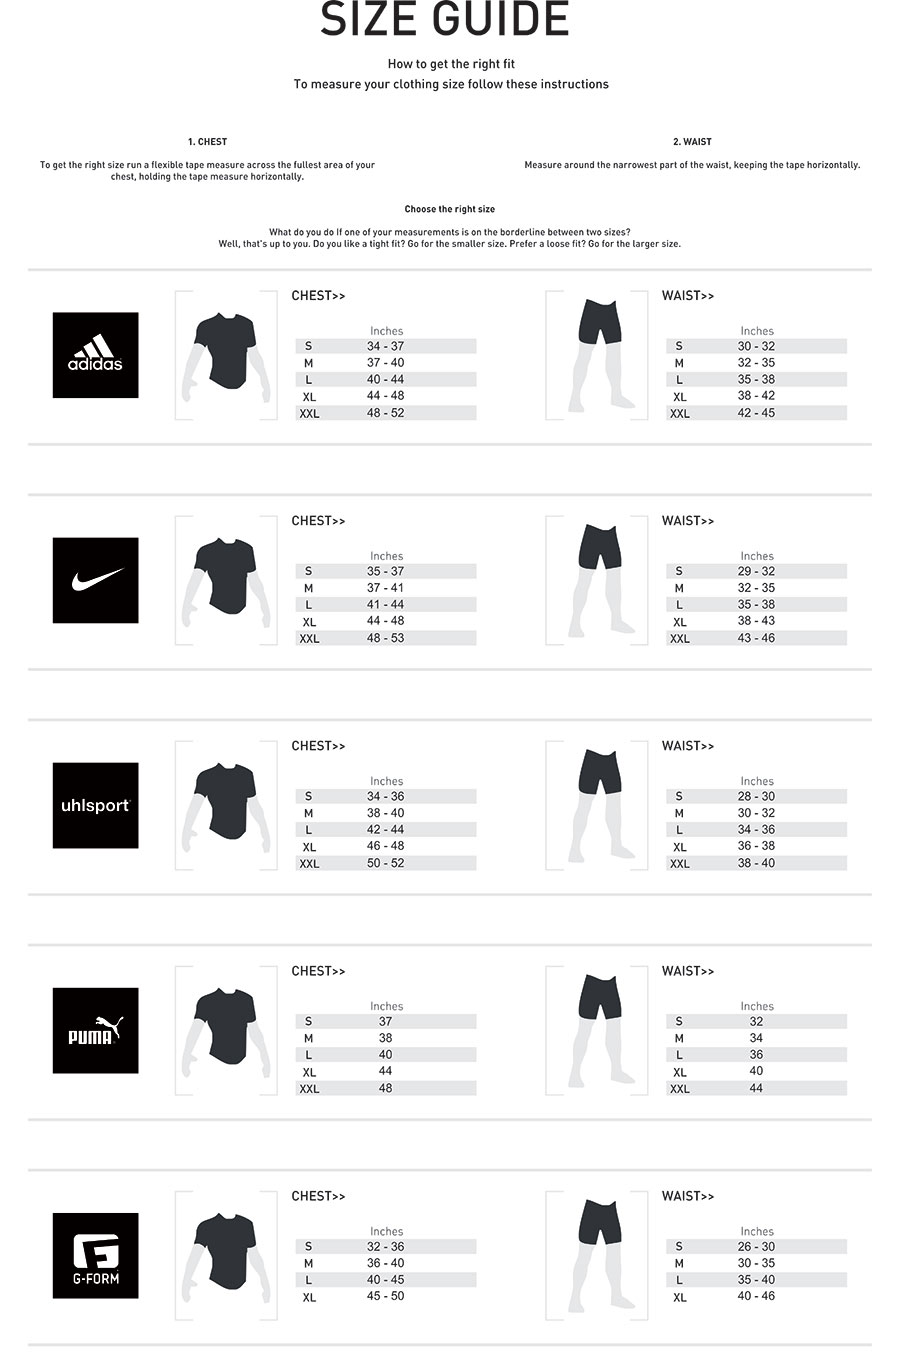 adidas size guide mens